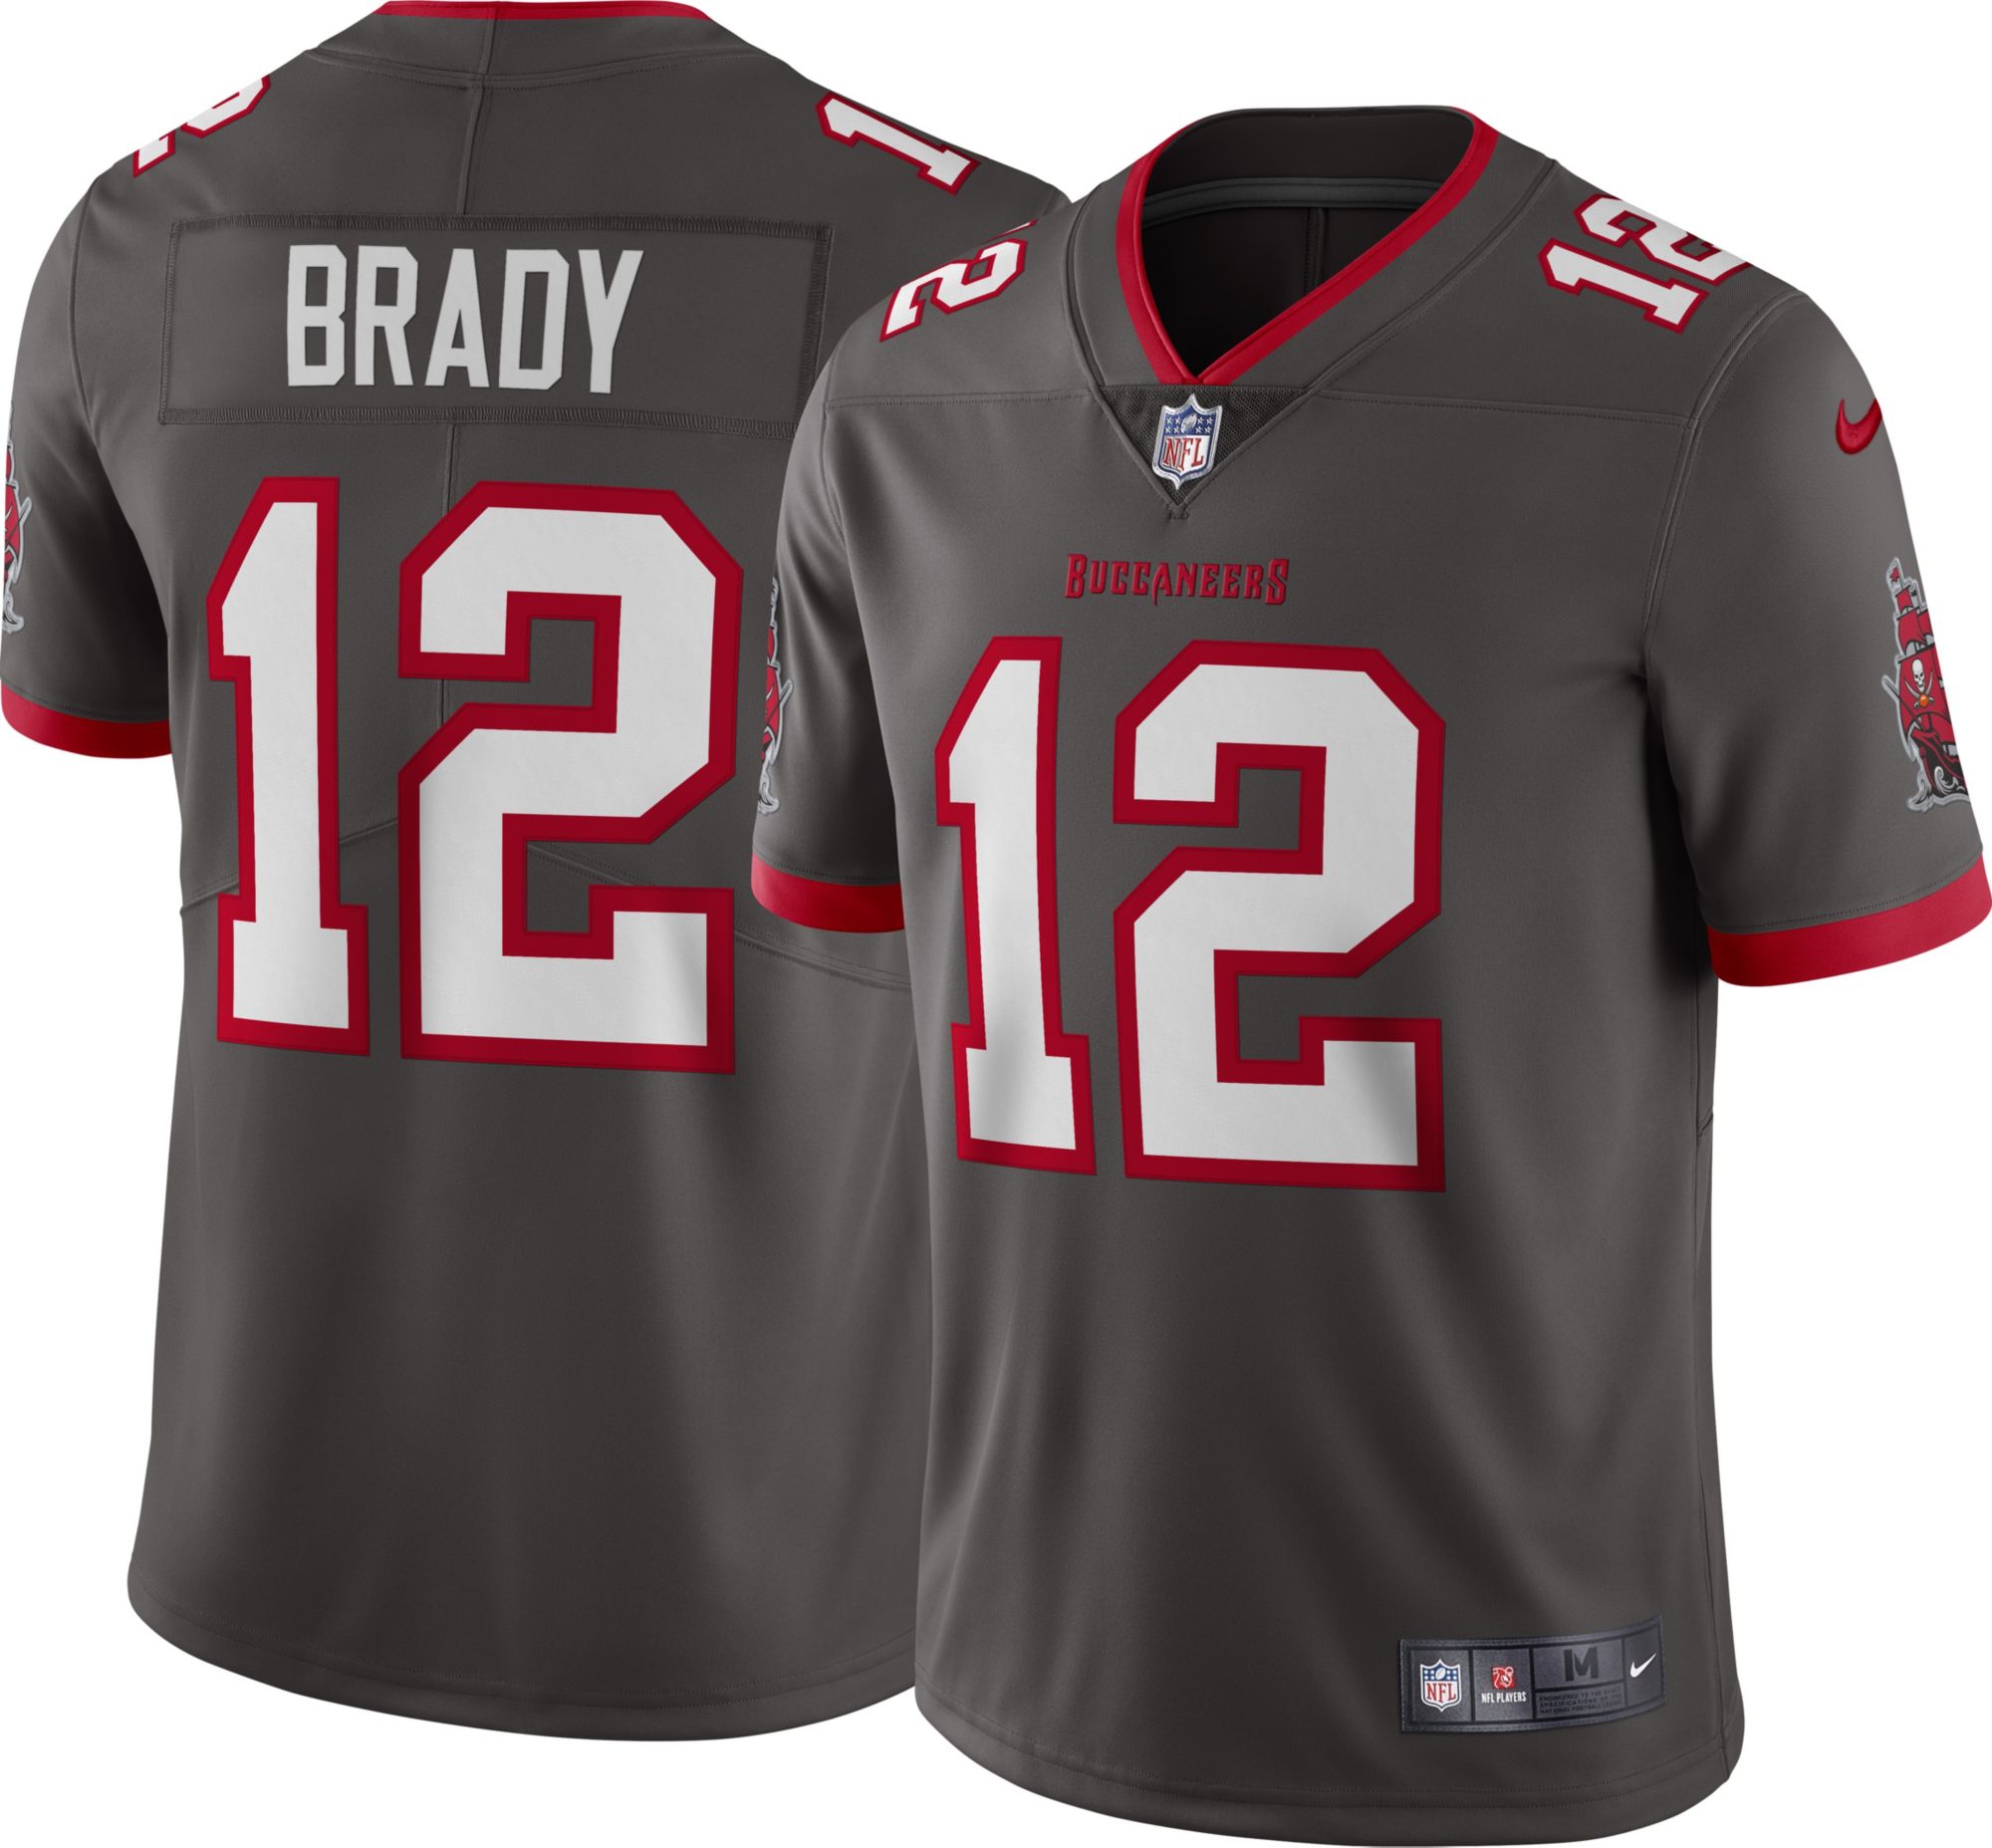 Men's Sports T-shirts  Nike Performance NFL TOM BRADY TAMPA BAY BUCCANEERS  – Print T-shirt – deep pewter/light brown – VG62474 - Fashion-Forward  Footwear and Apparel for Every Occasion!